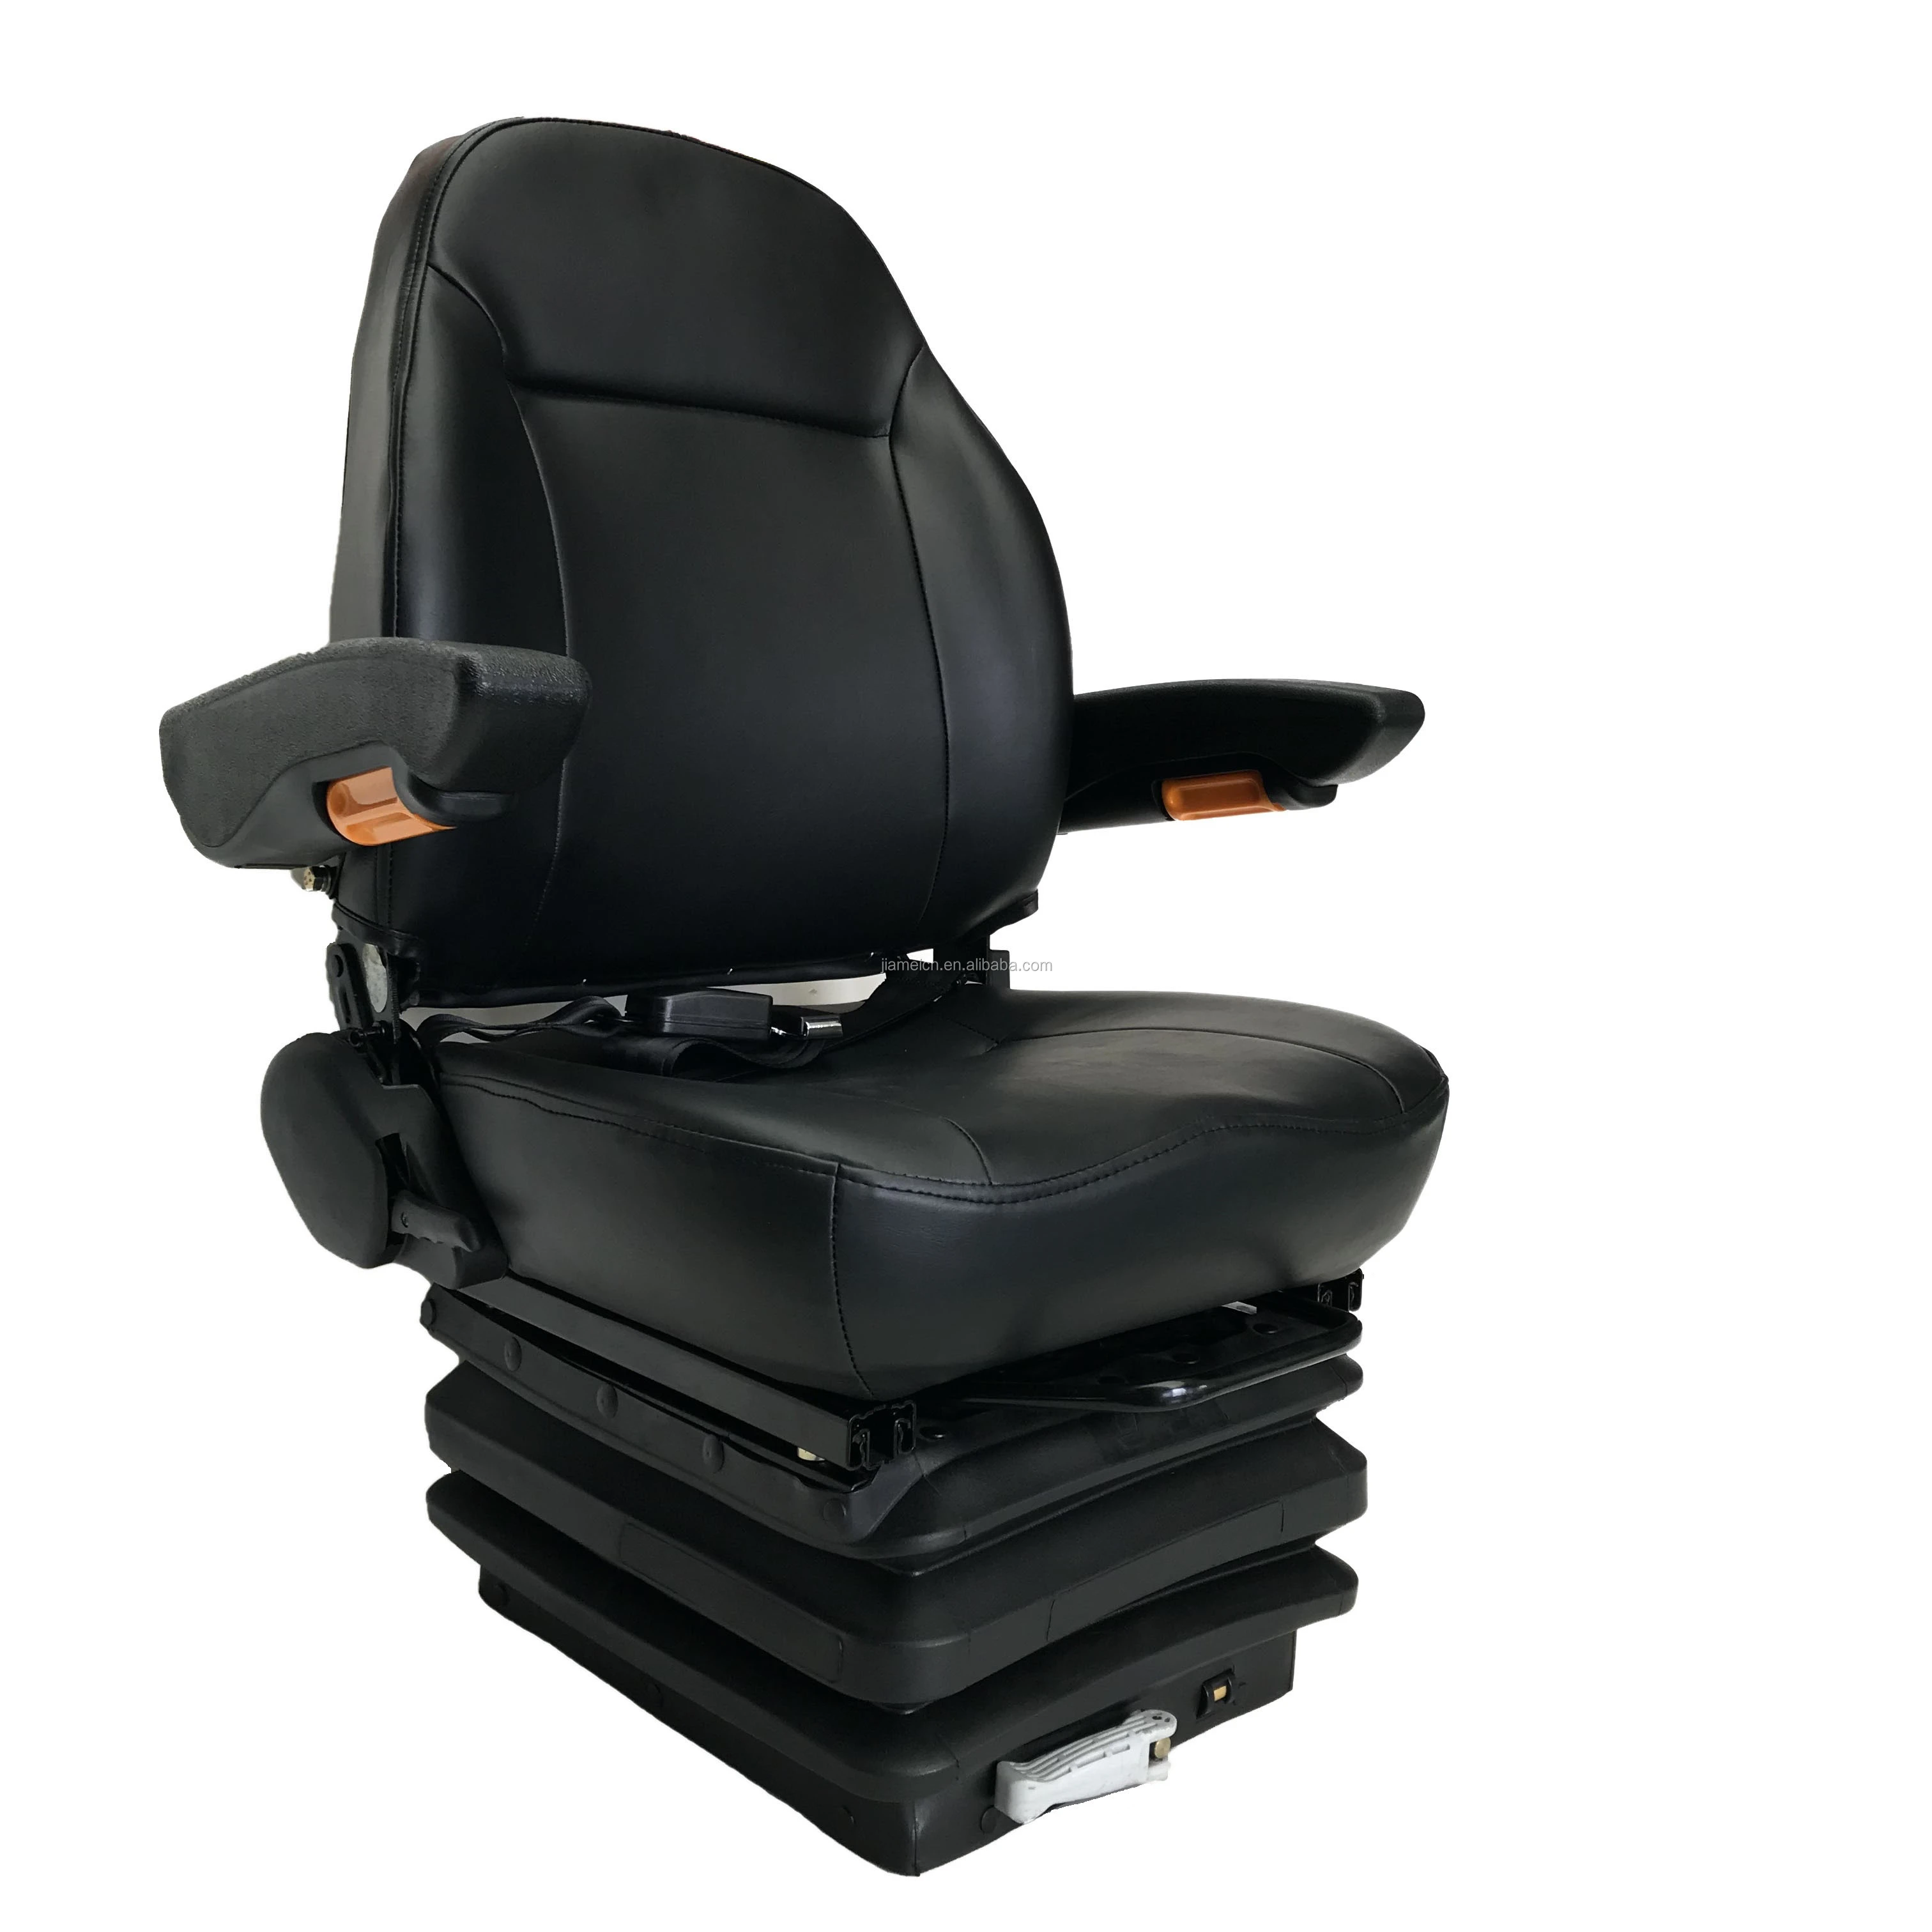 Luxury comfortable car seat with weight adjustment